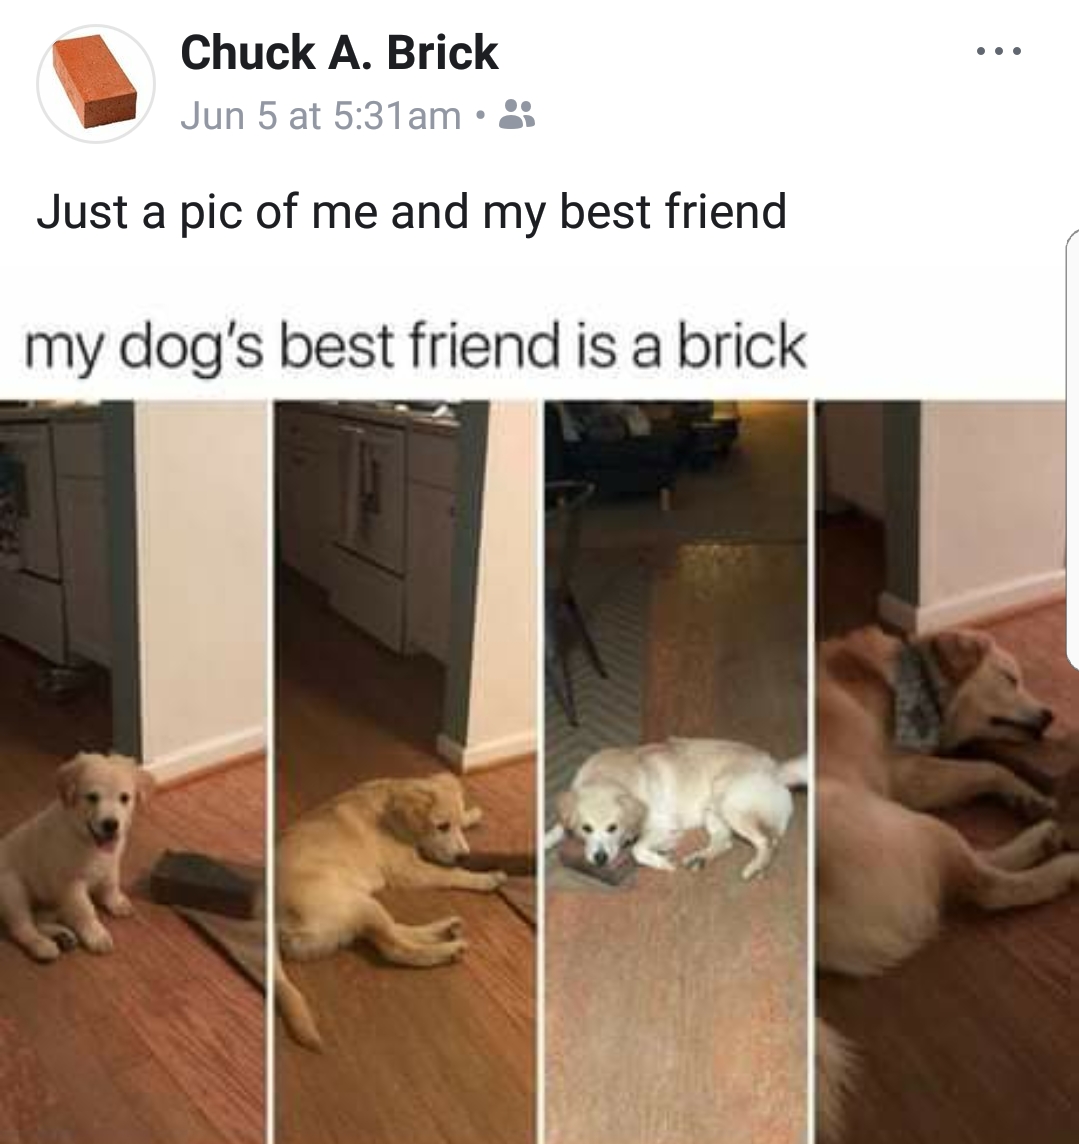 my dogs best friend is a brick - Chuck A. Brick Jun 5 at am Just a pic of me and my best friend my dog's best friend is a brick